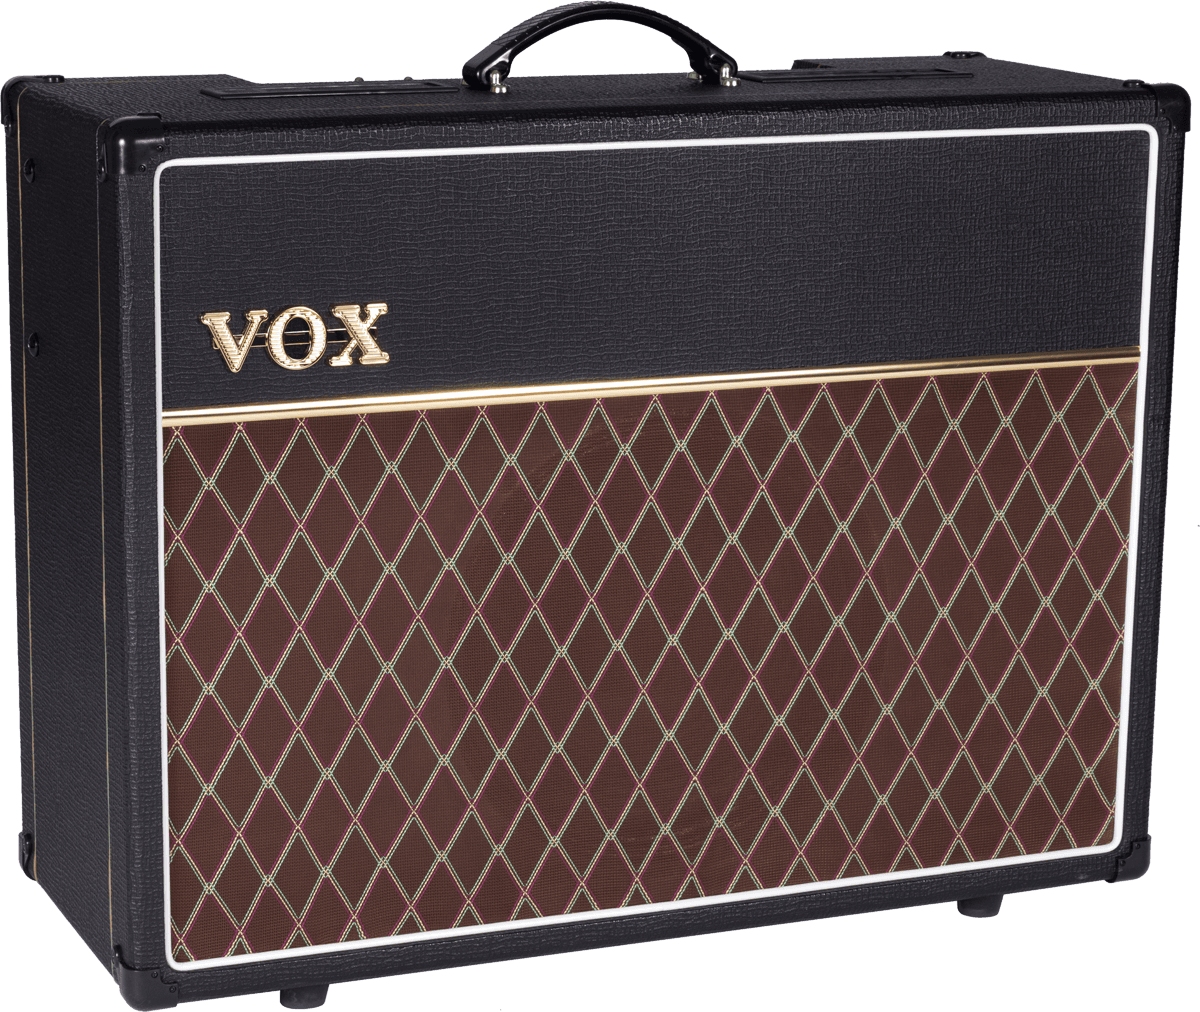 Vox Ac30 Onetwelve Ac30s1 1x12 30w - Electric guitar combo amp - Main picture